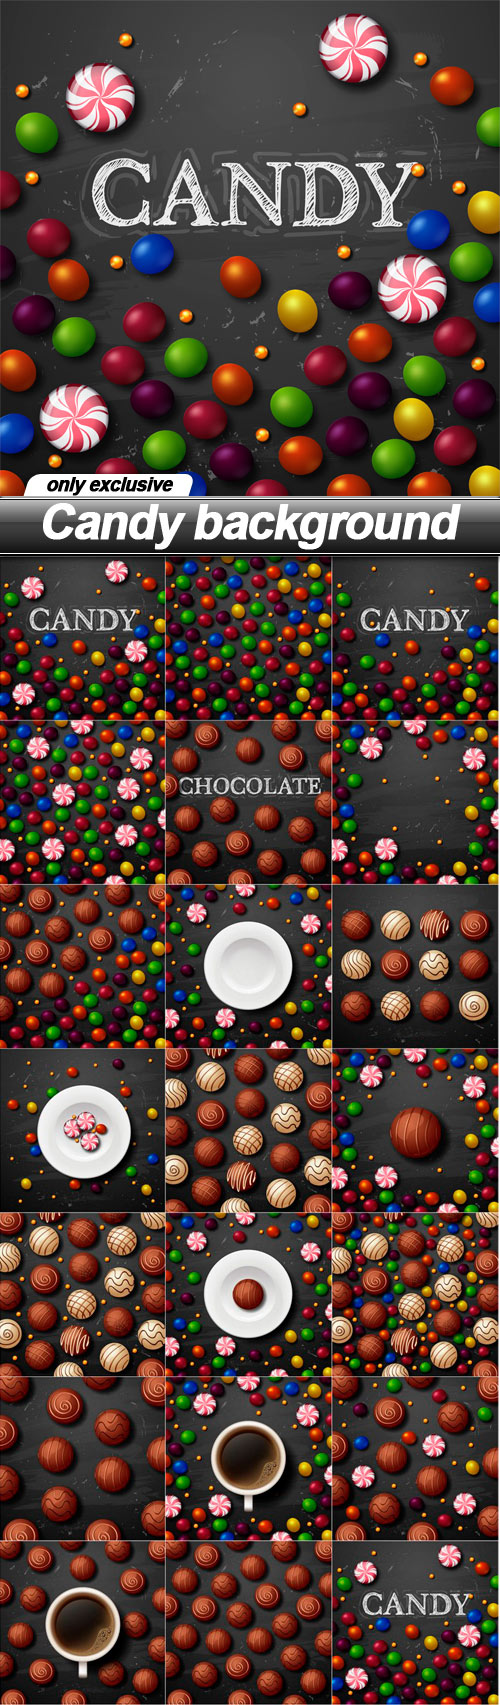 Candy background - 20 EPS